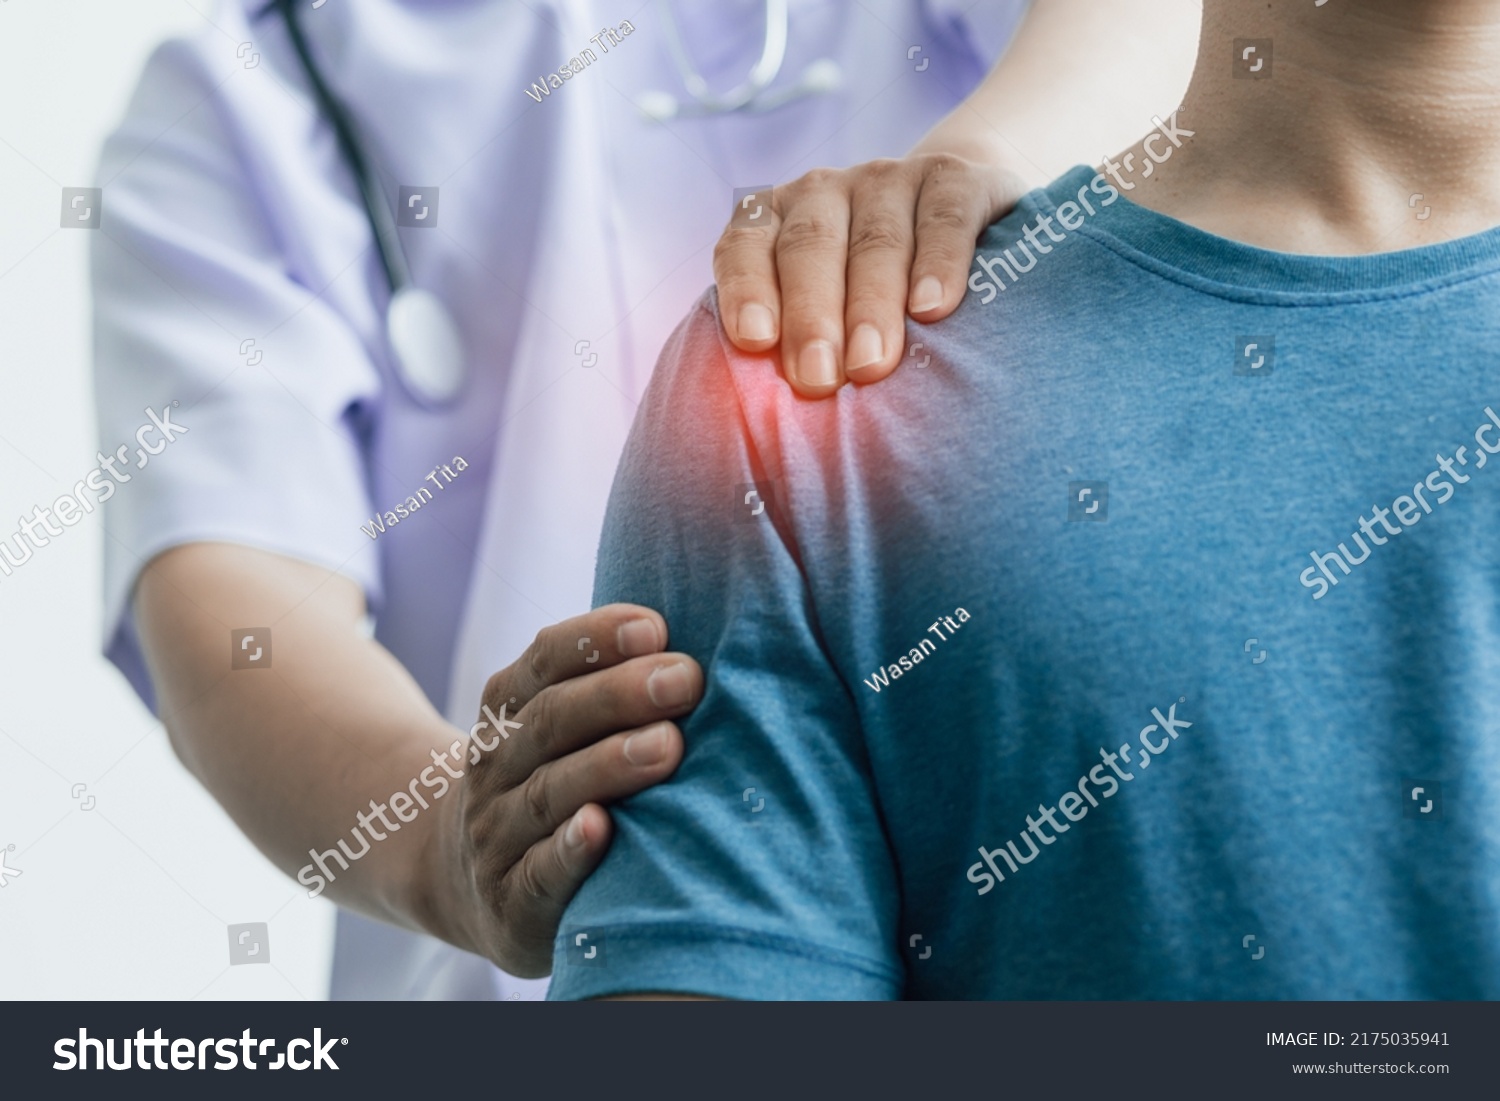 A man with shoulder pain goes to the doctor, The doctor diagnoses the patient's arm pain and shoulder pain. Concept of physical therapy and rehabilitation. #2175035941